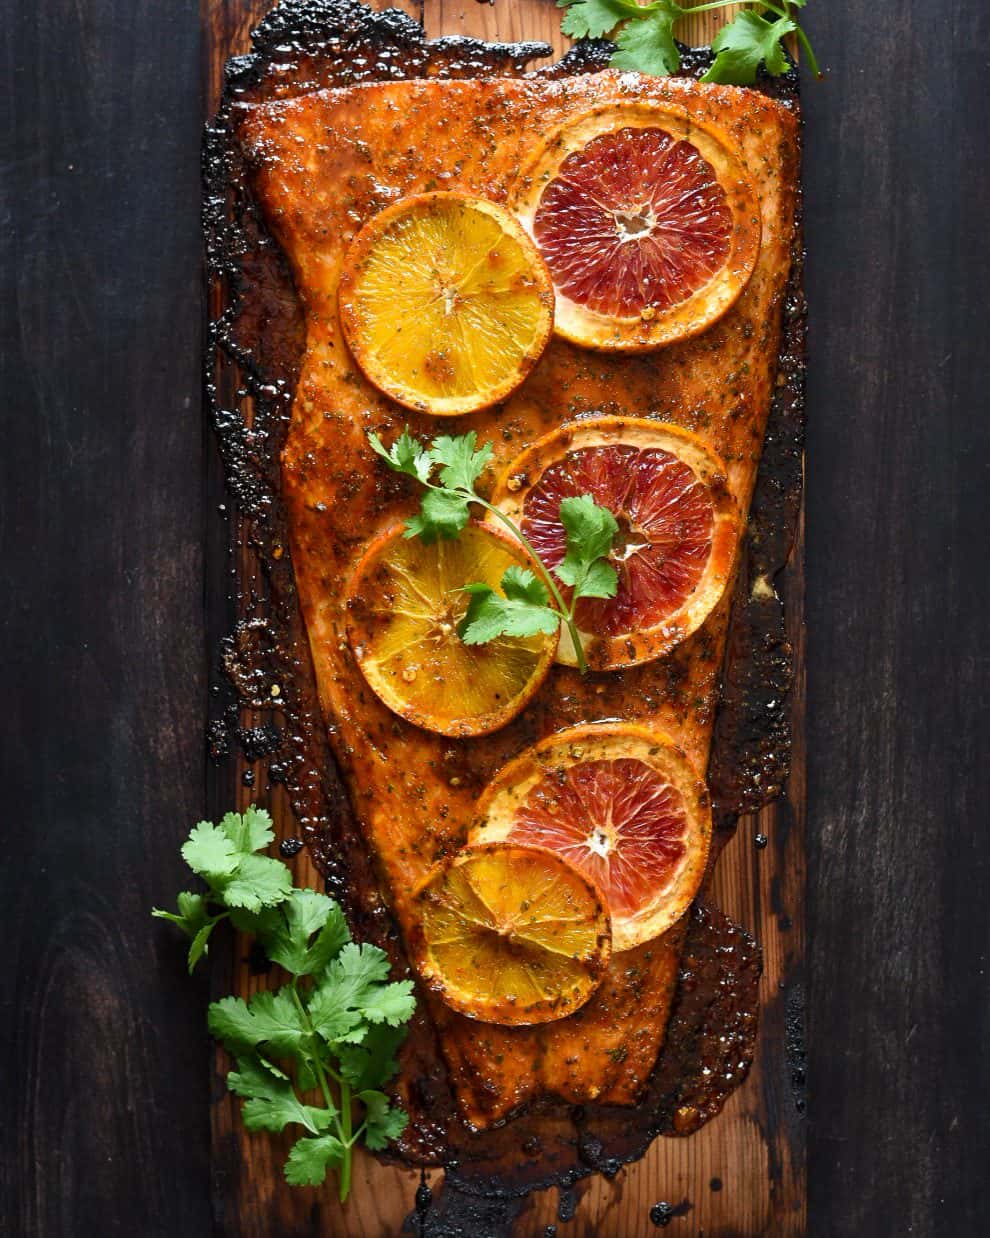 A cooked salmon fillet on a cedar plank with orange slices and cilantro.